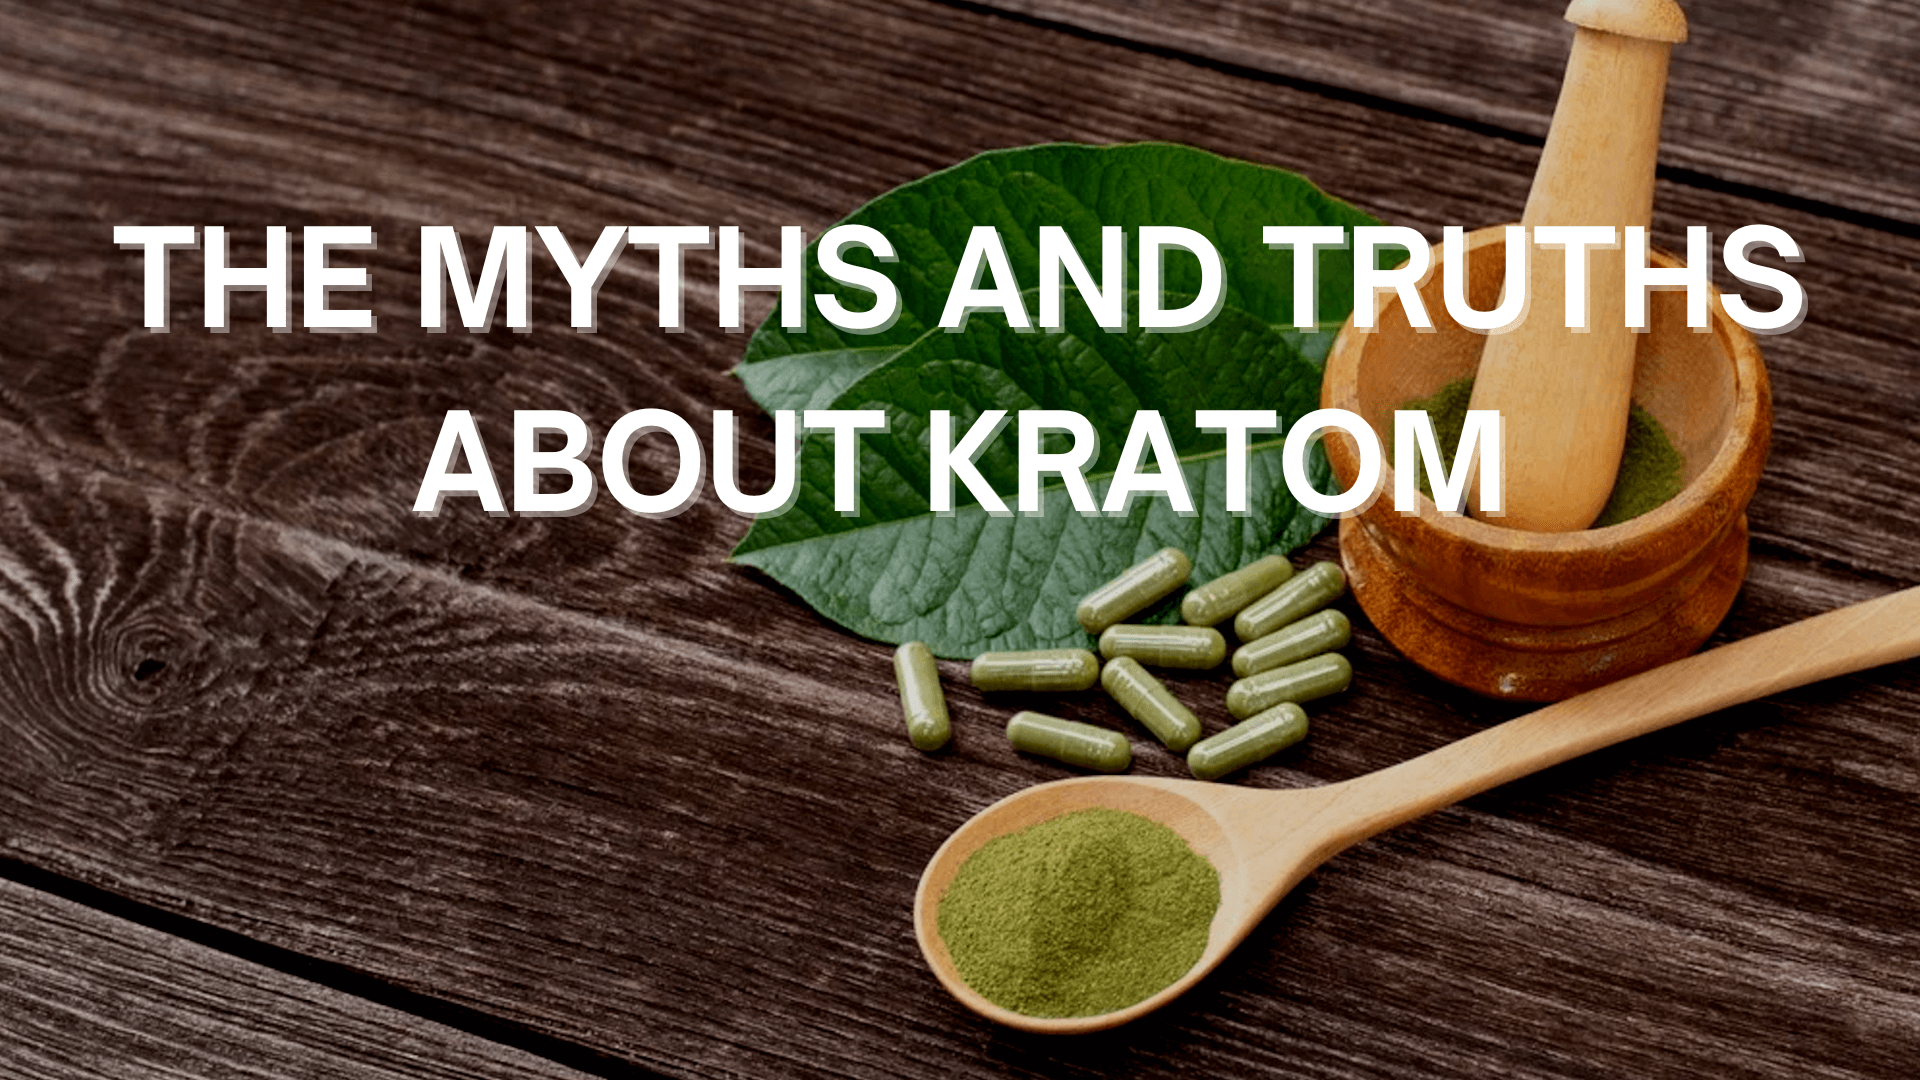 The Myths and Truths About Kratom